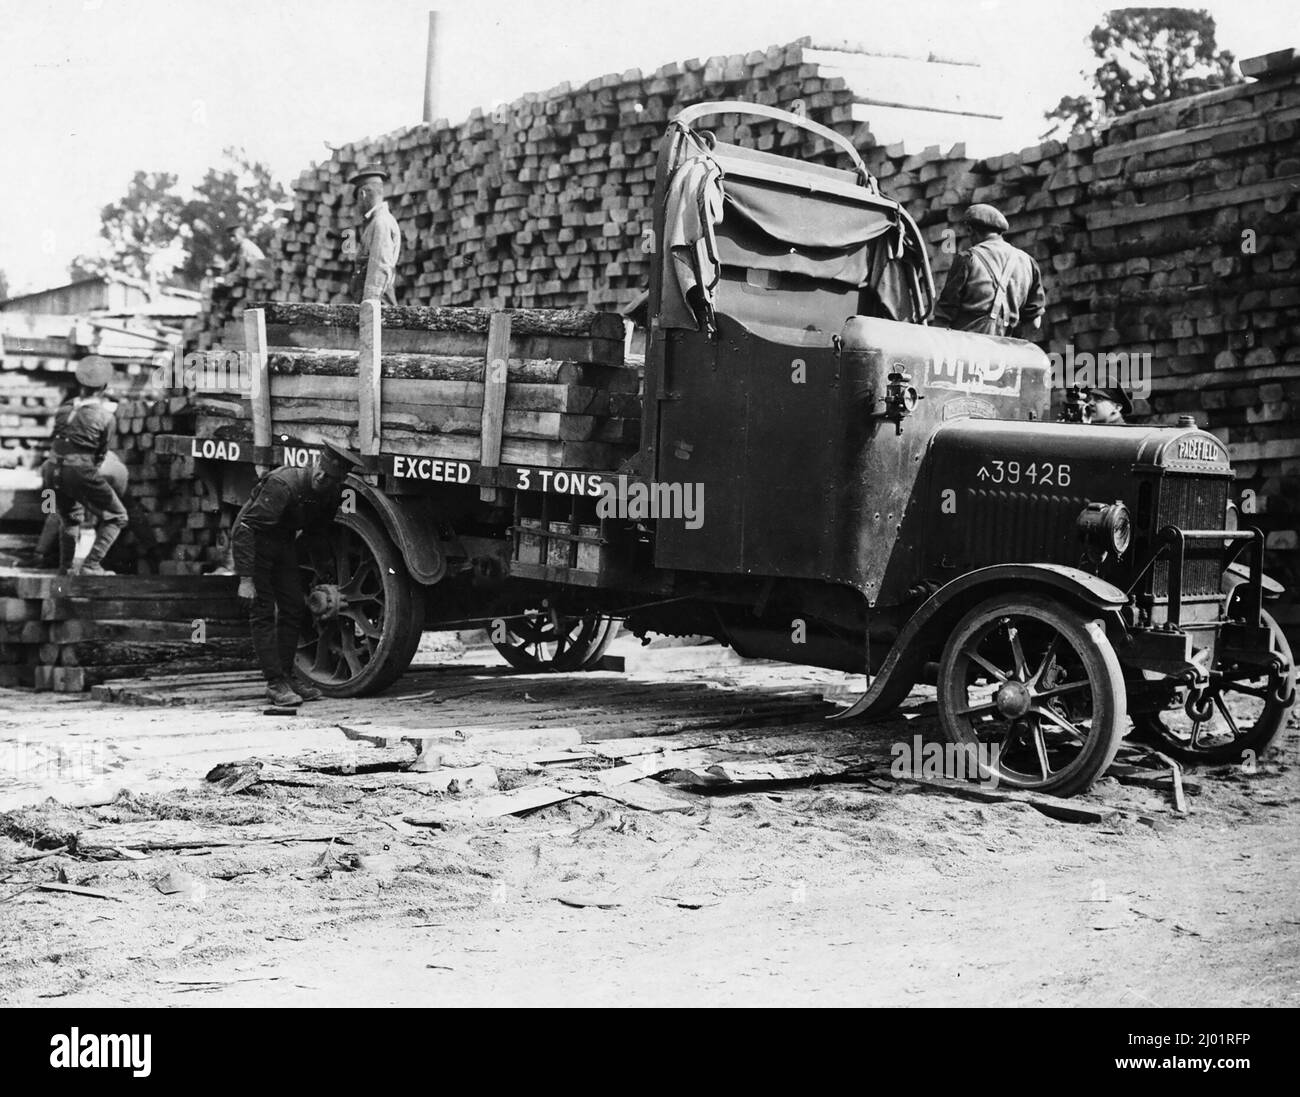 Two soldiers are lifting the logs from the pile while a third secures them on to the truck. Two soldiers stand at the front of the truck chatting to each other. The stack of rough-hewn trunks in the background towers over the scene. Sawmills were often set up close to the front line so that the timber could be made into lumber ready for use Stock Photo